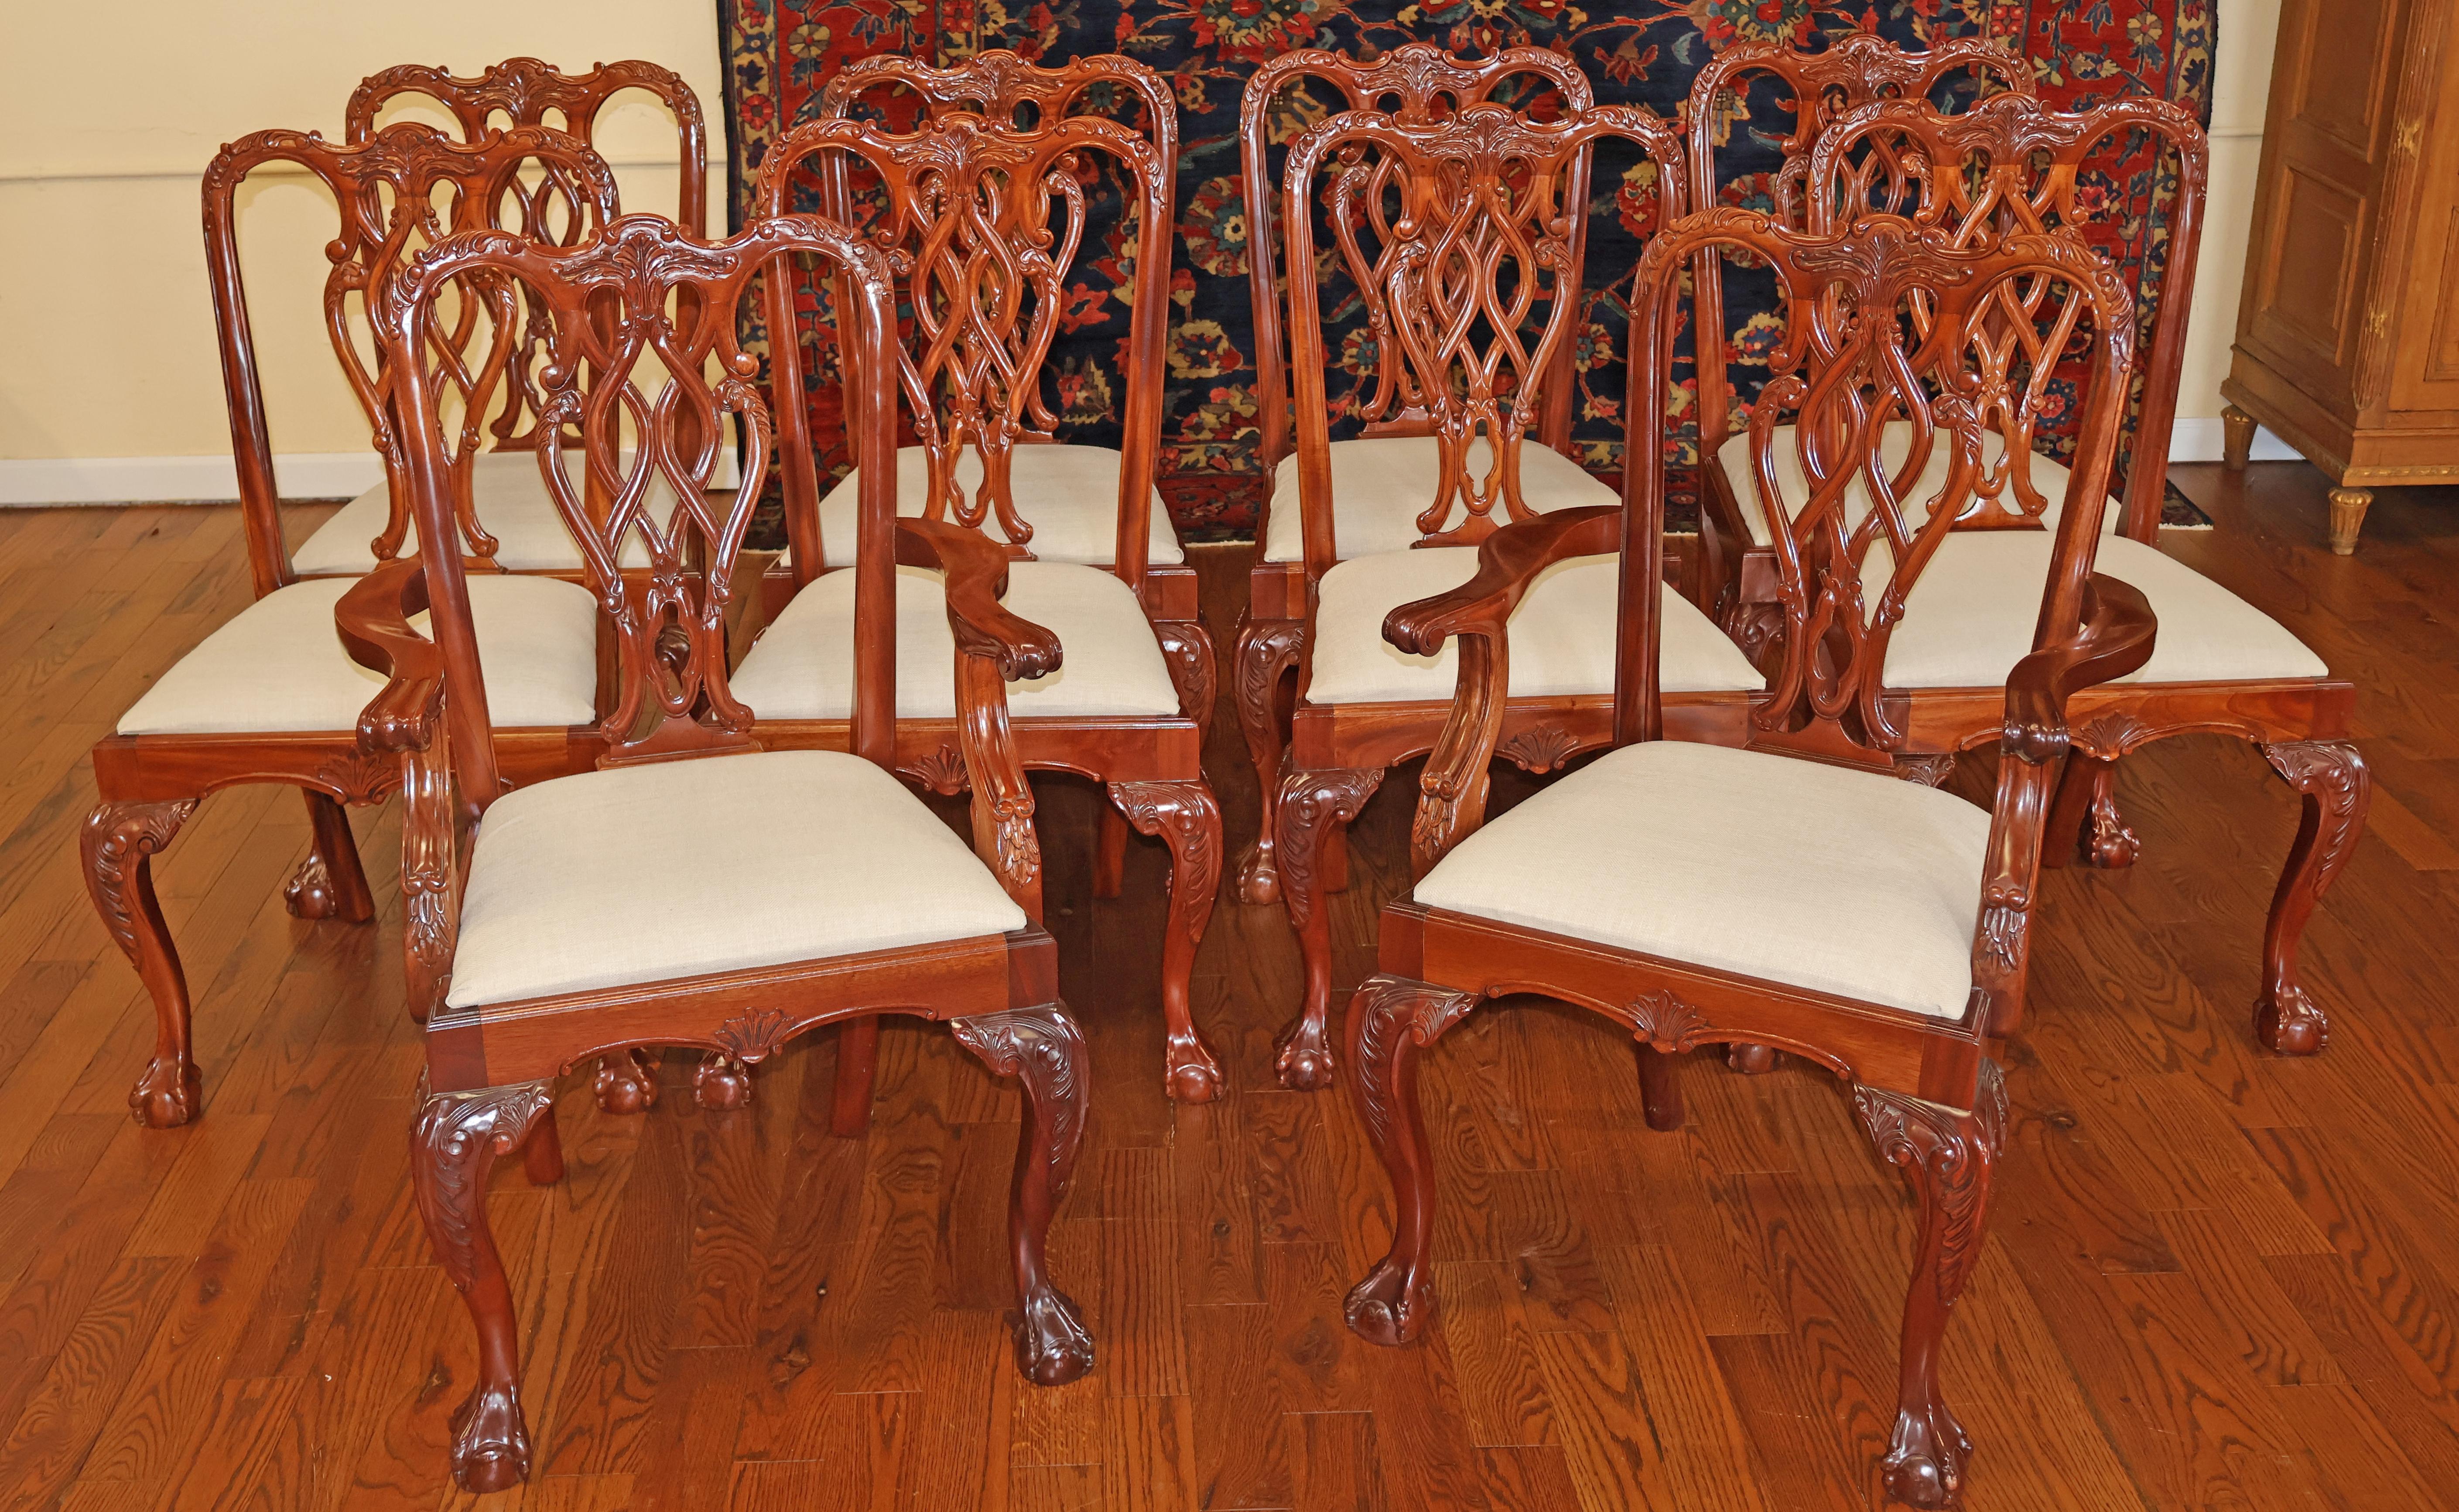 Set of 10 Mahogany Chippendale Style Ball & Claw Foot Dining Chairs

Dimensions : Arm chairs - 40